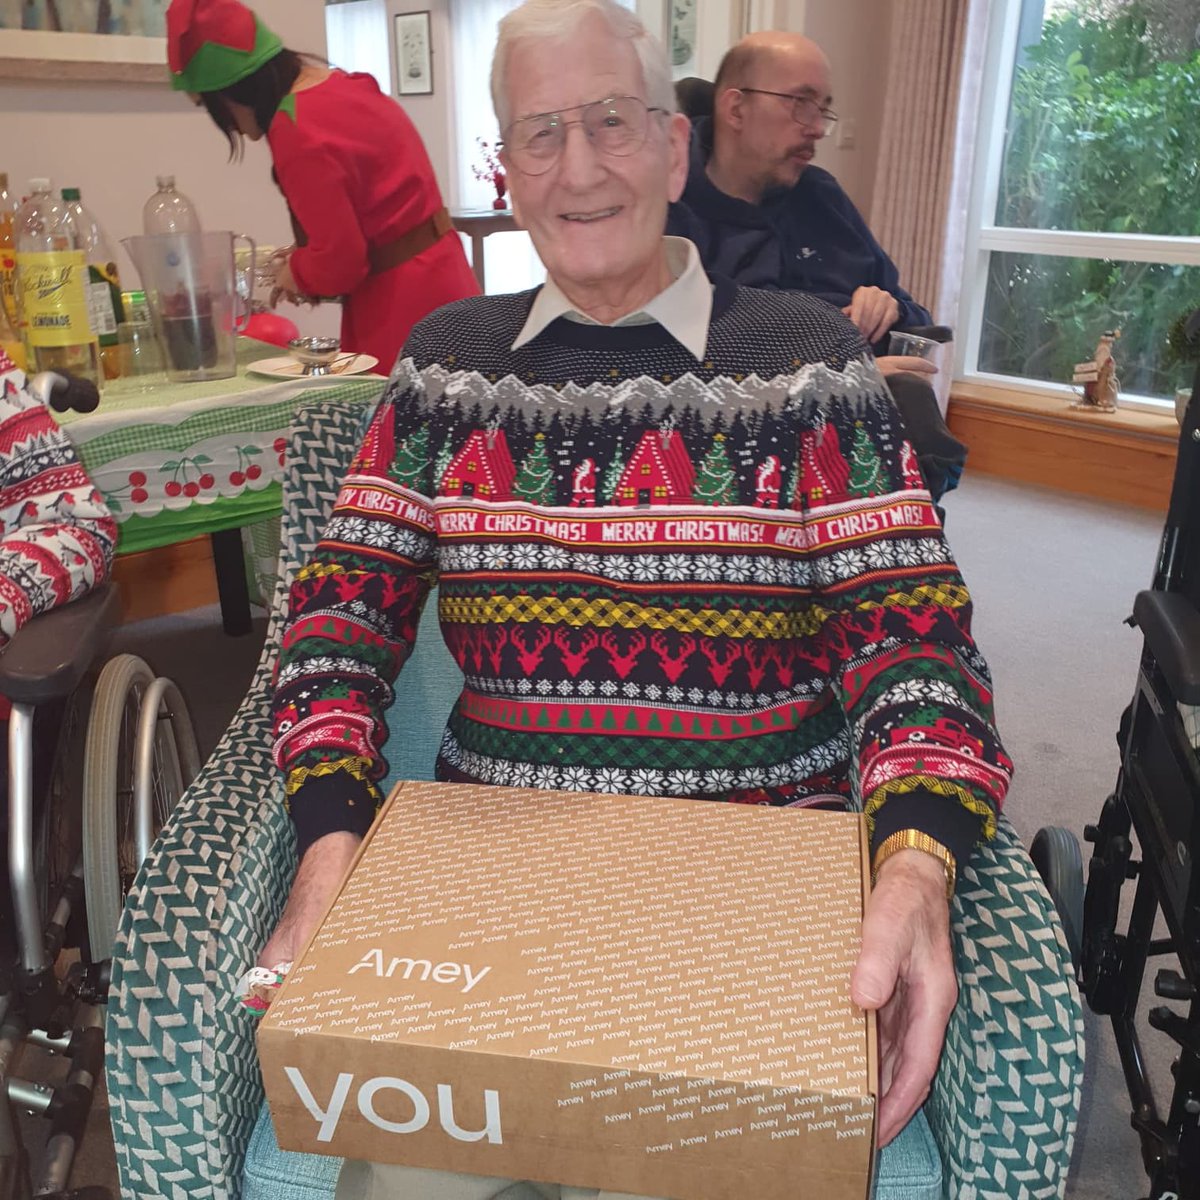 The RAF Honington Comunity Team have been out and about delivering the Amey Defence Christmas Hampers to Veterans. All 3 services represent here. Merry Christmas to you all.